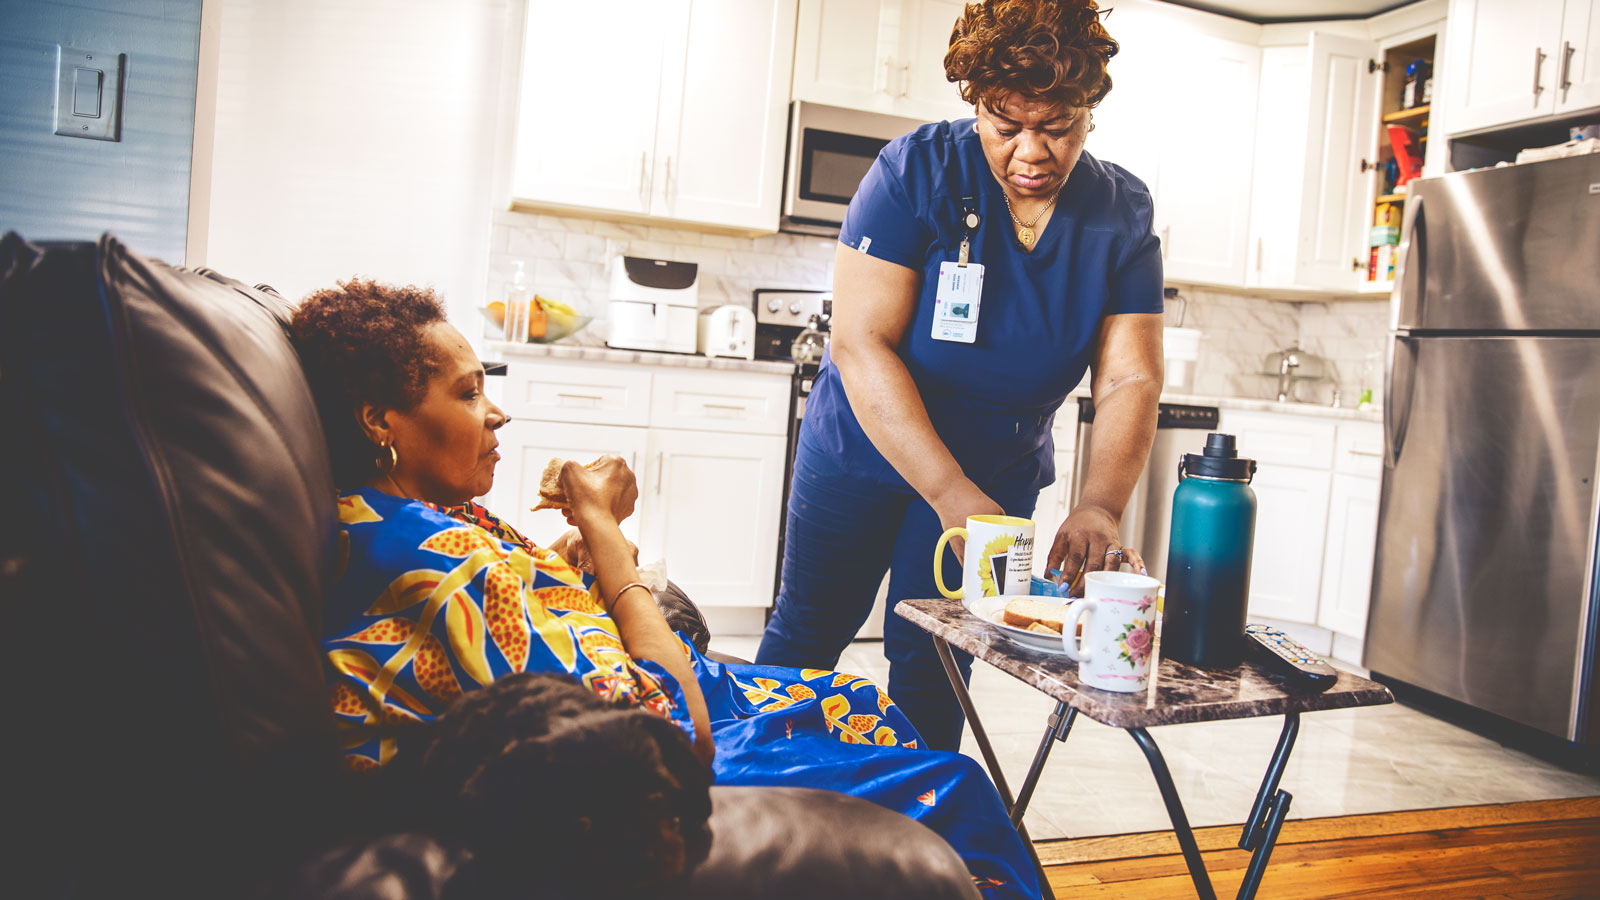 A home health aide caring for a patient